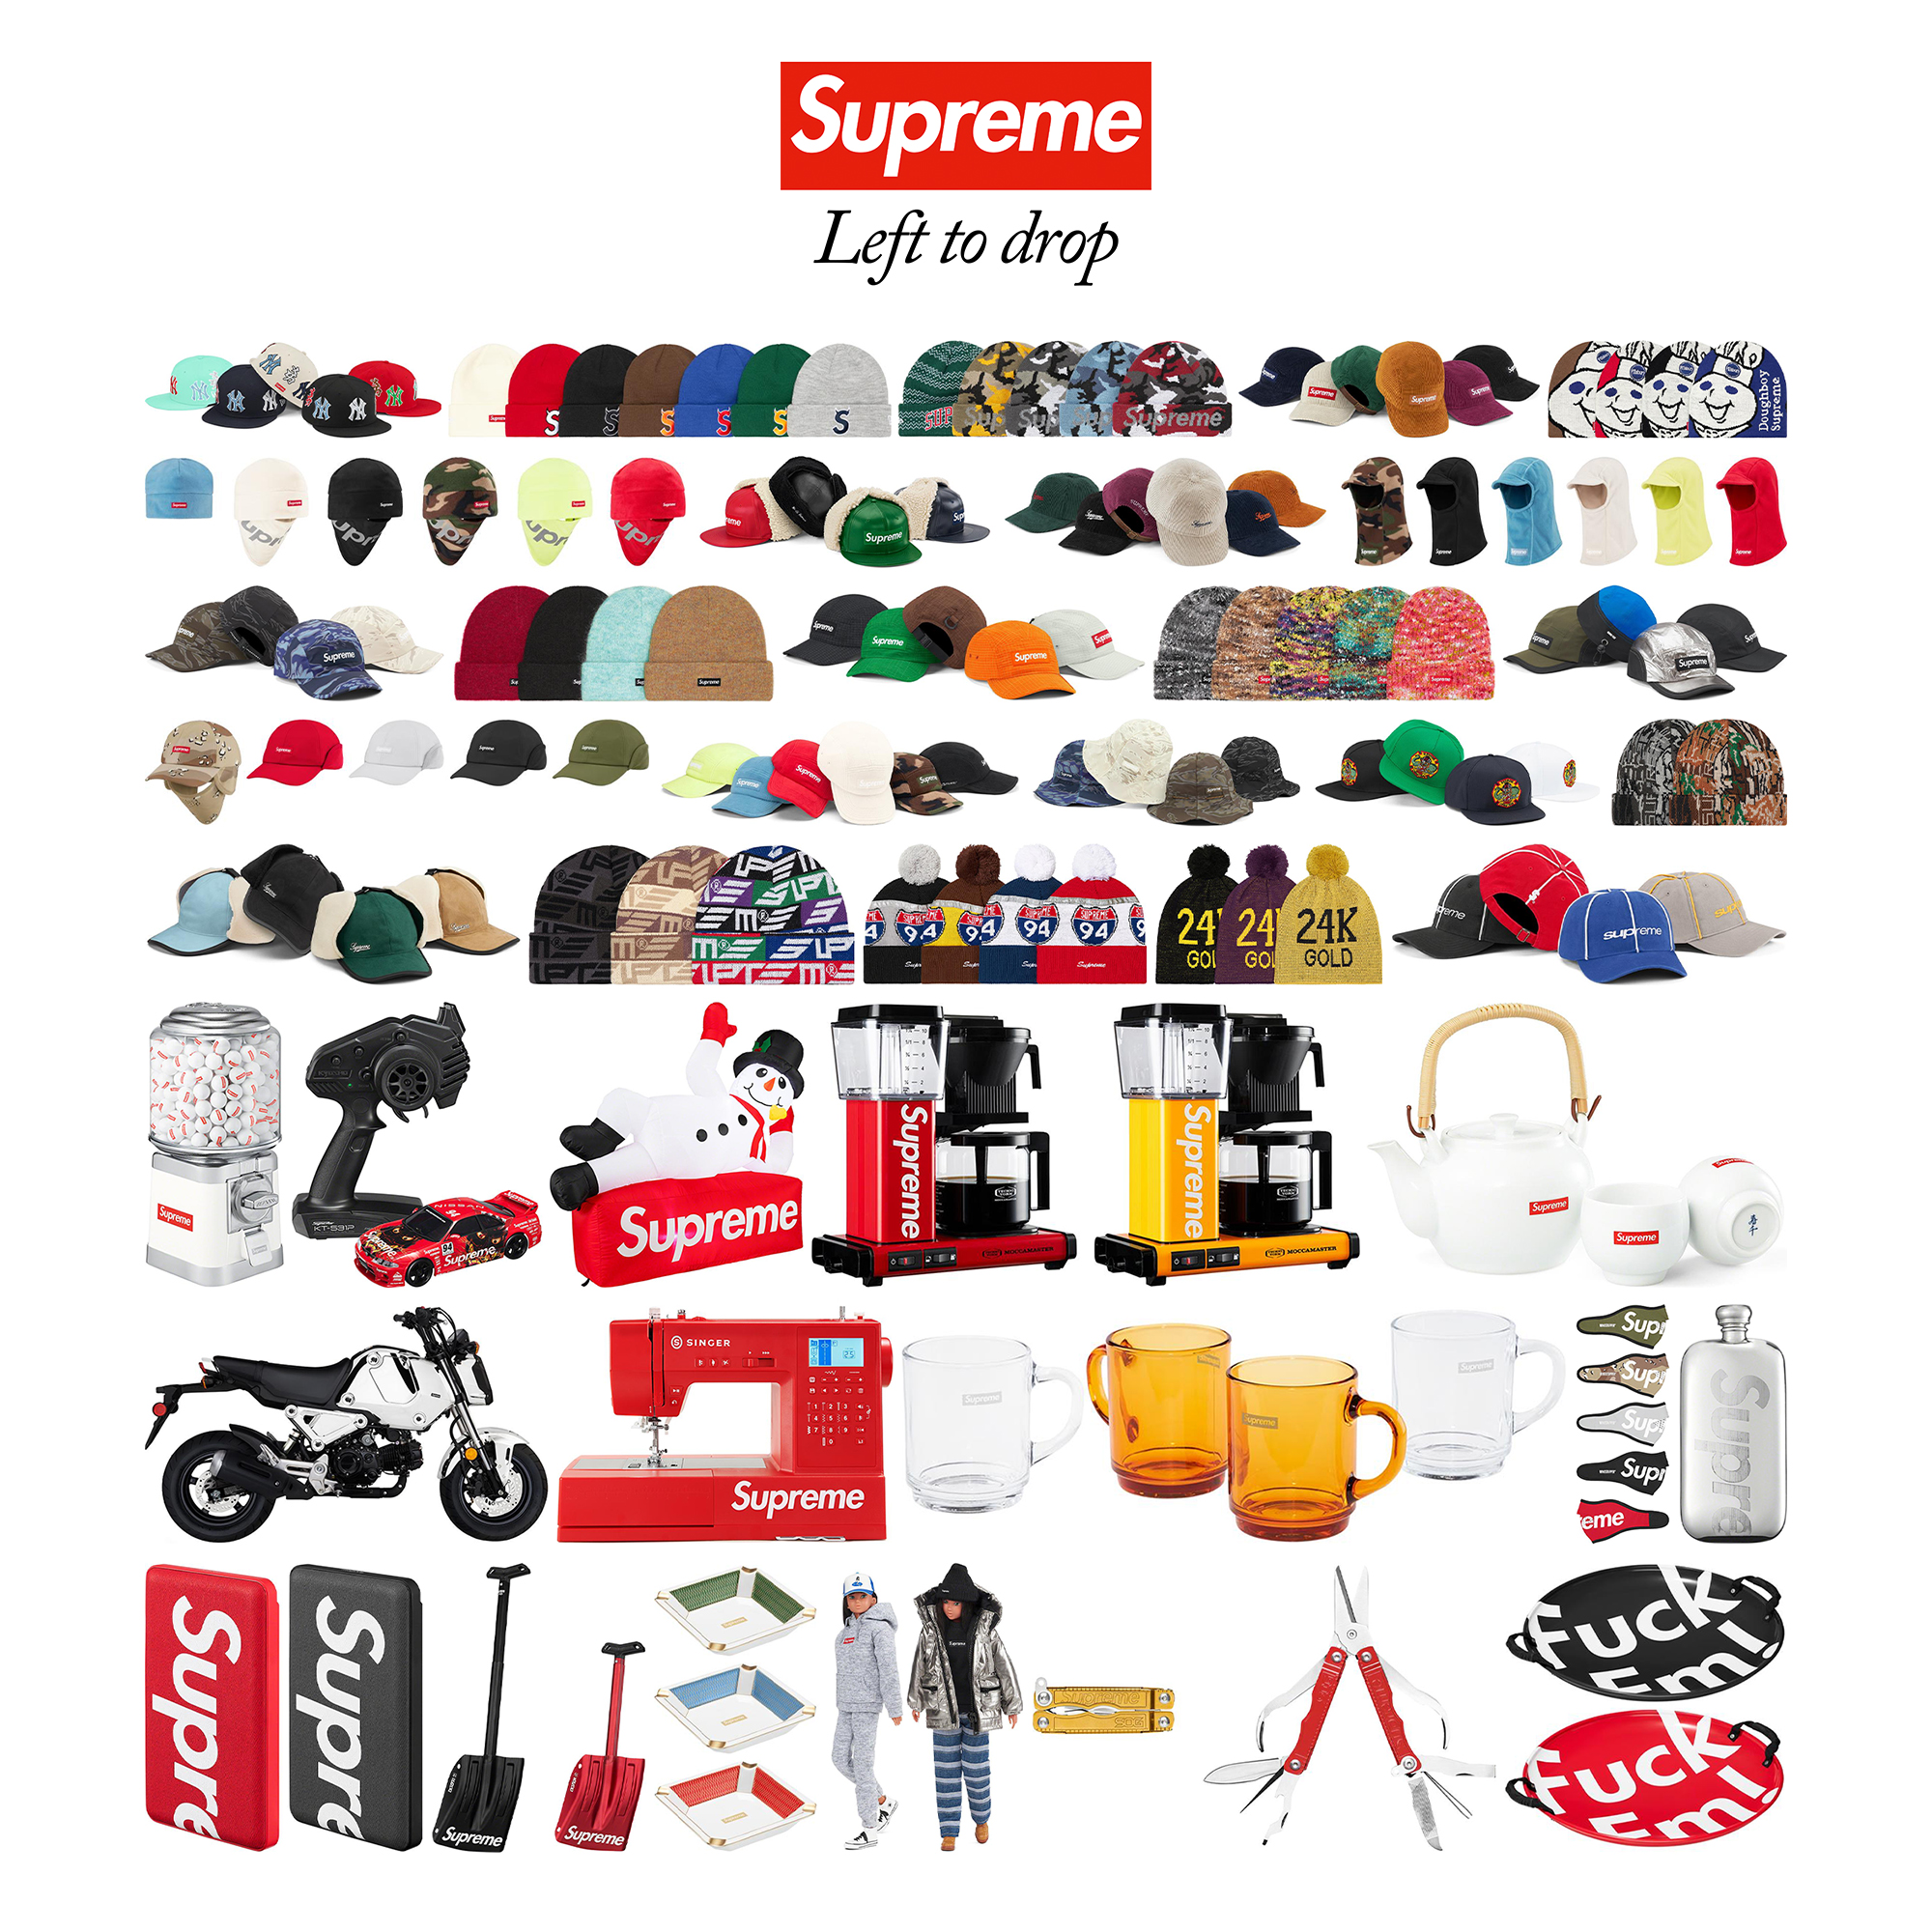 Items left to drop during fall-winter 2023 season - Supreme